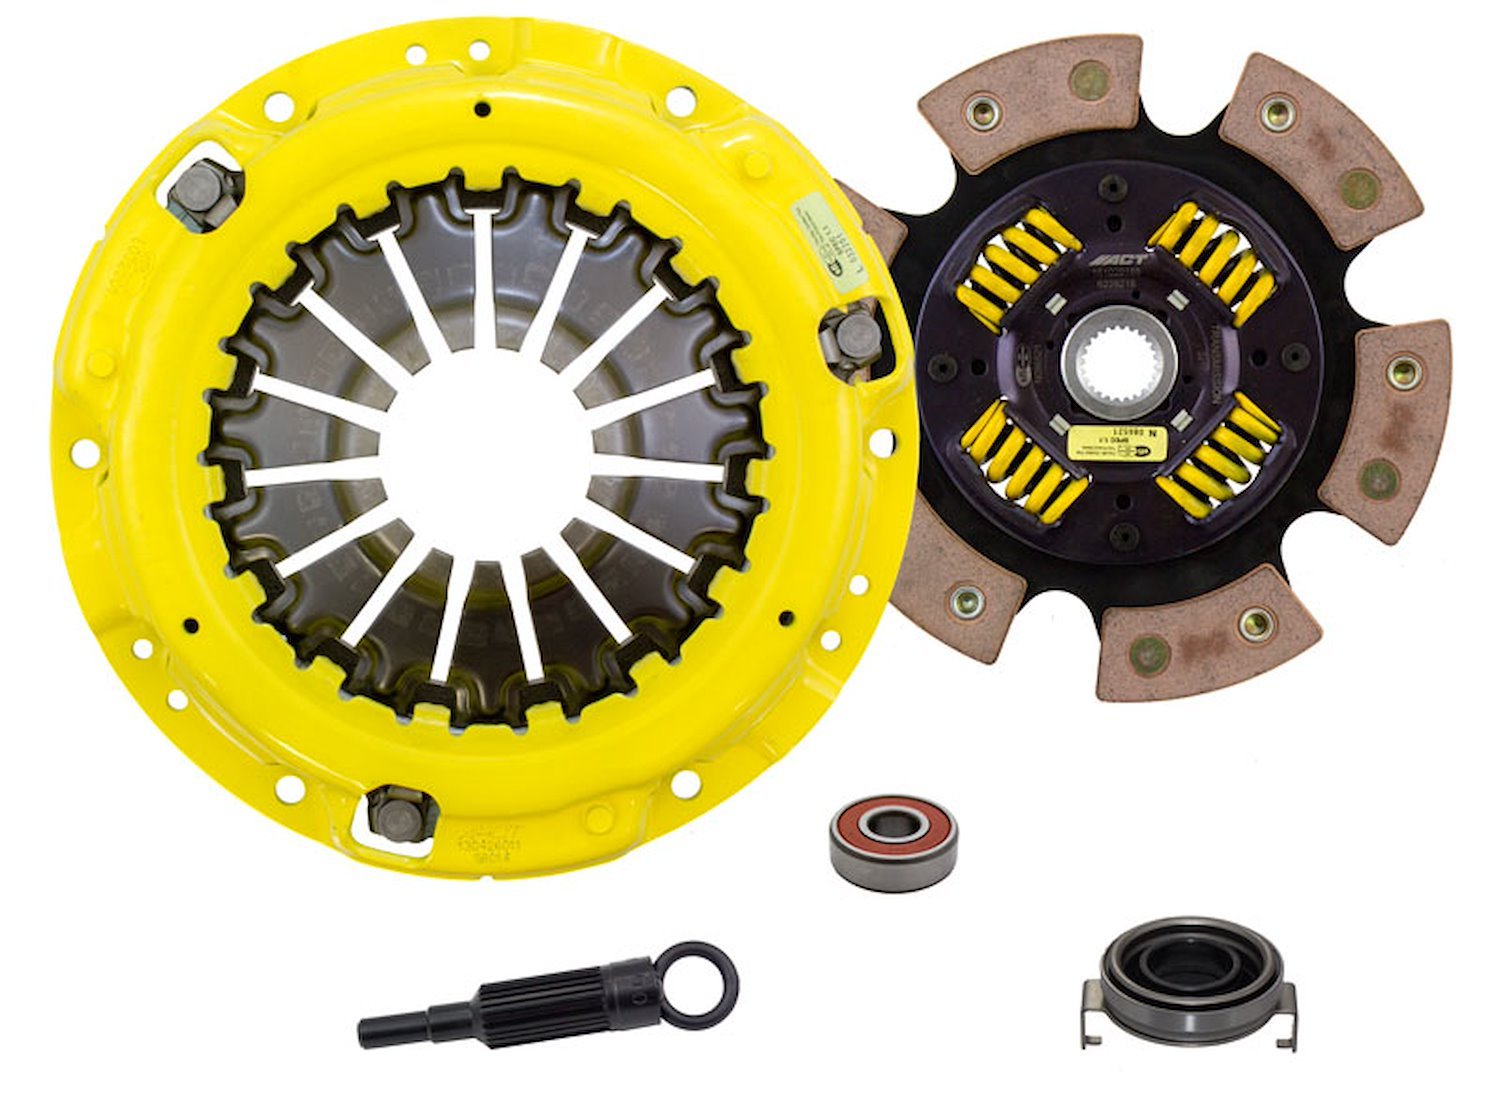 HD/Race Sprung 6-Pad Transmission Clutch Kit Fits Select Multiple Makes/Models